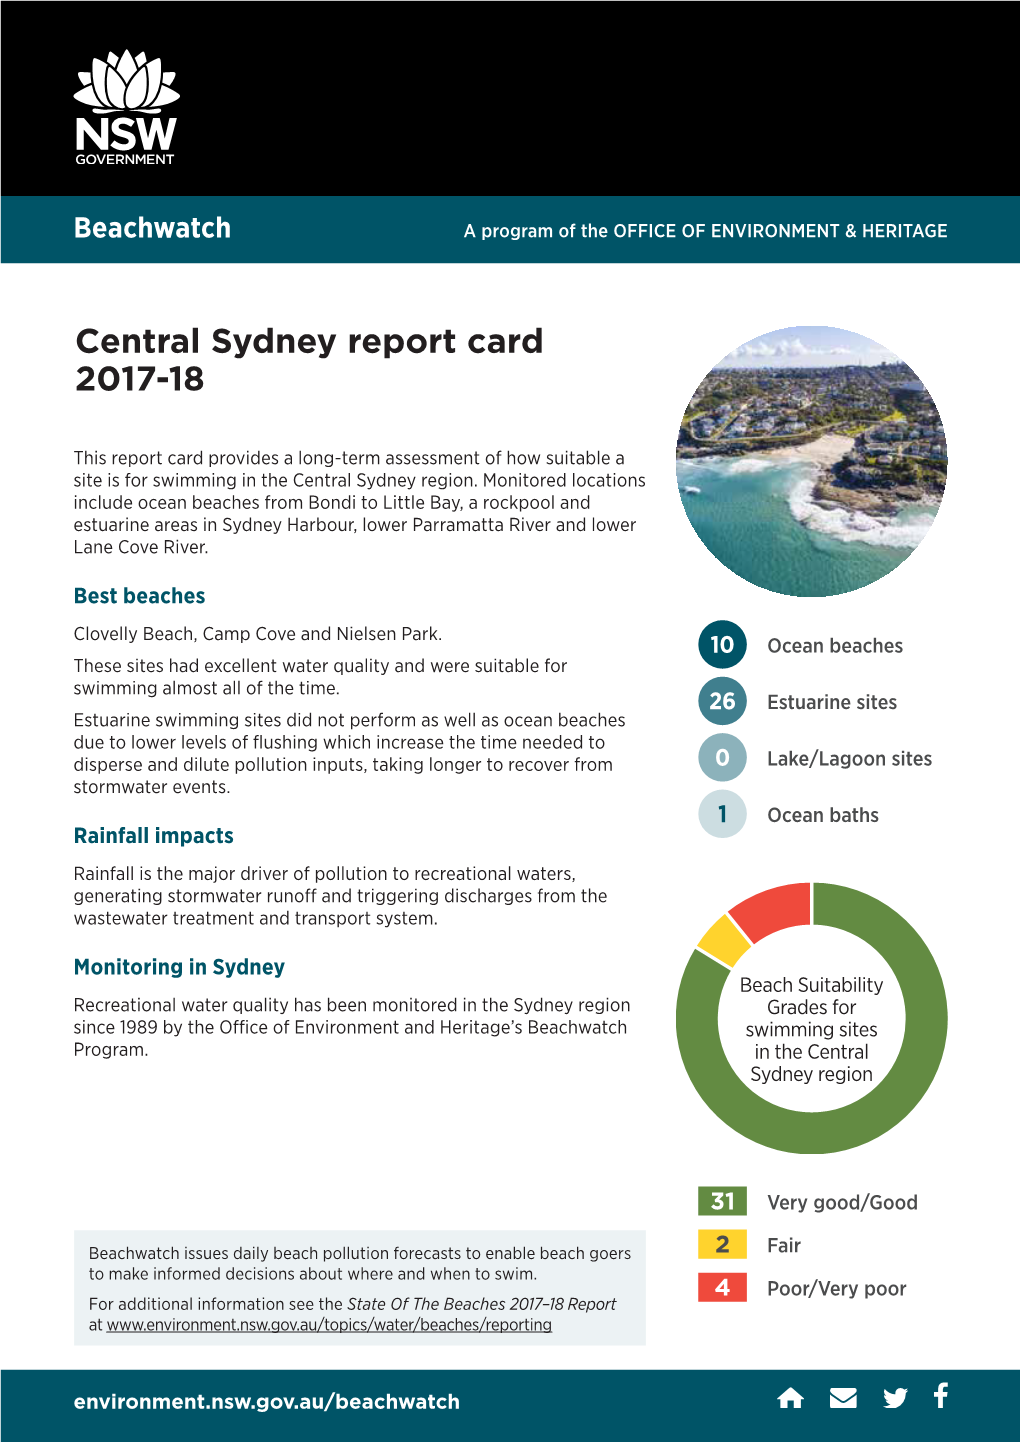 Central Sydney Report Card 2017-18